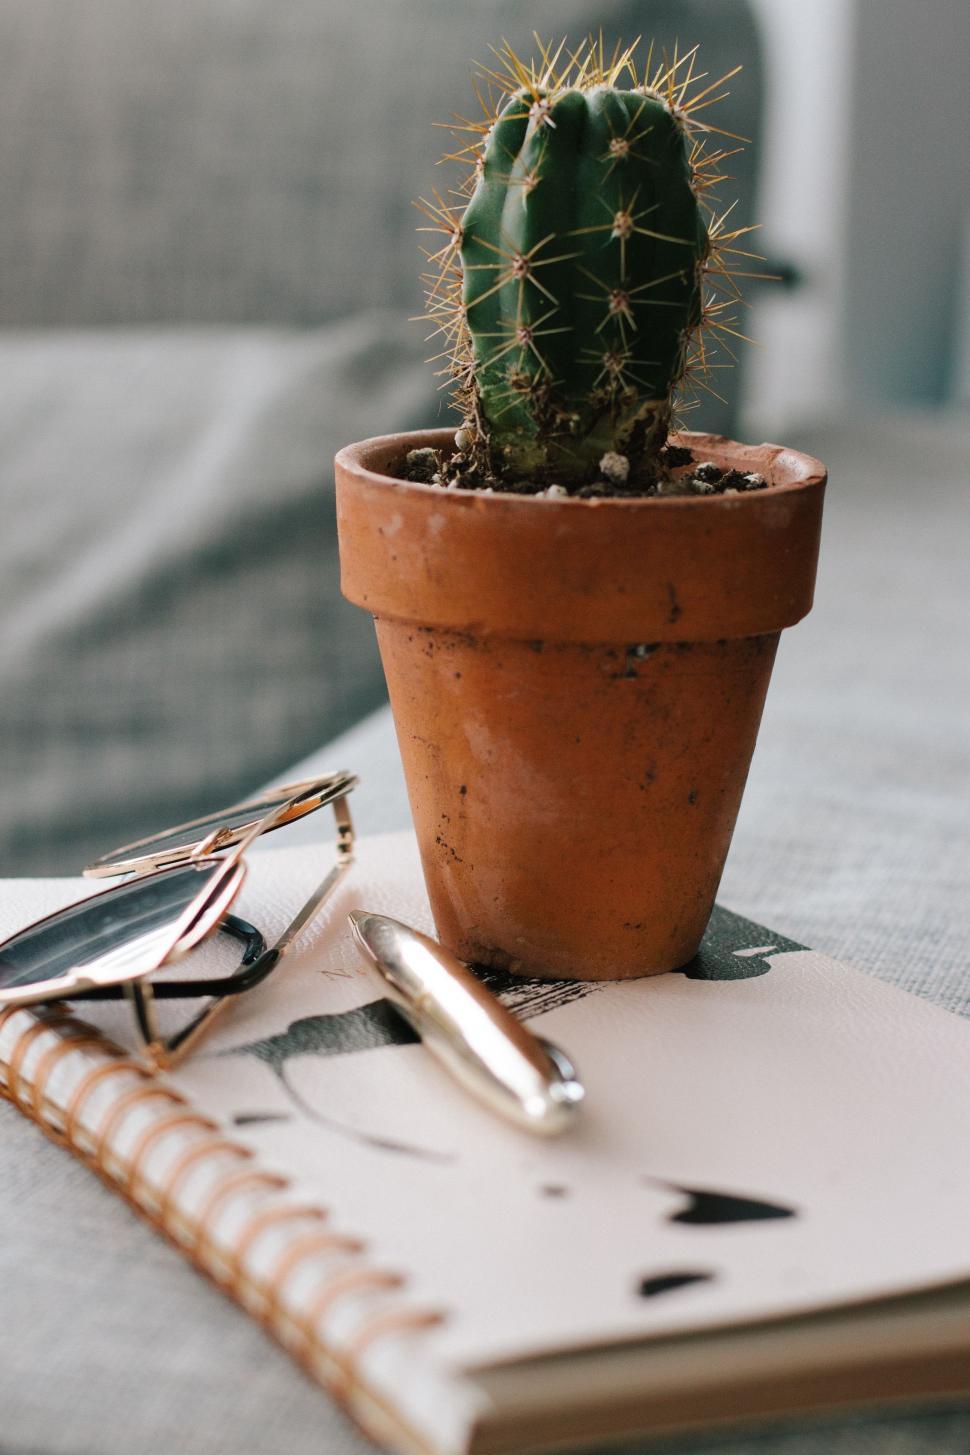 Free Image of Cactus, Notebook, and Glasses on Table 